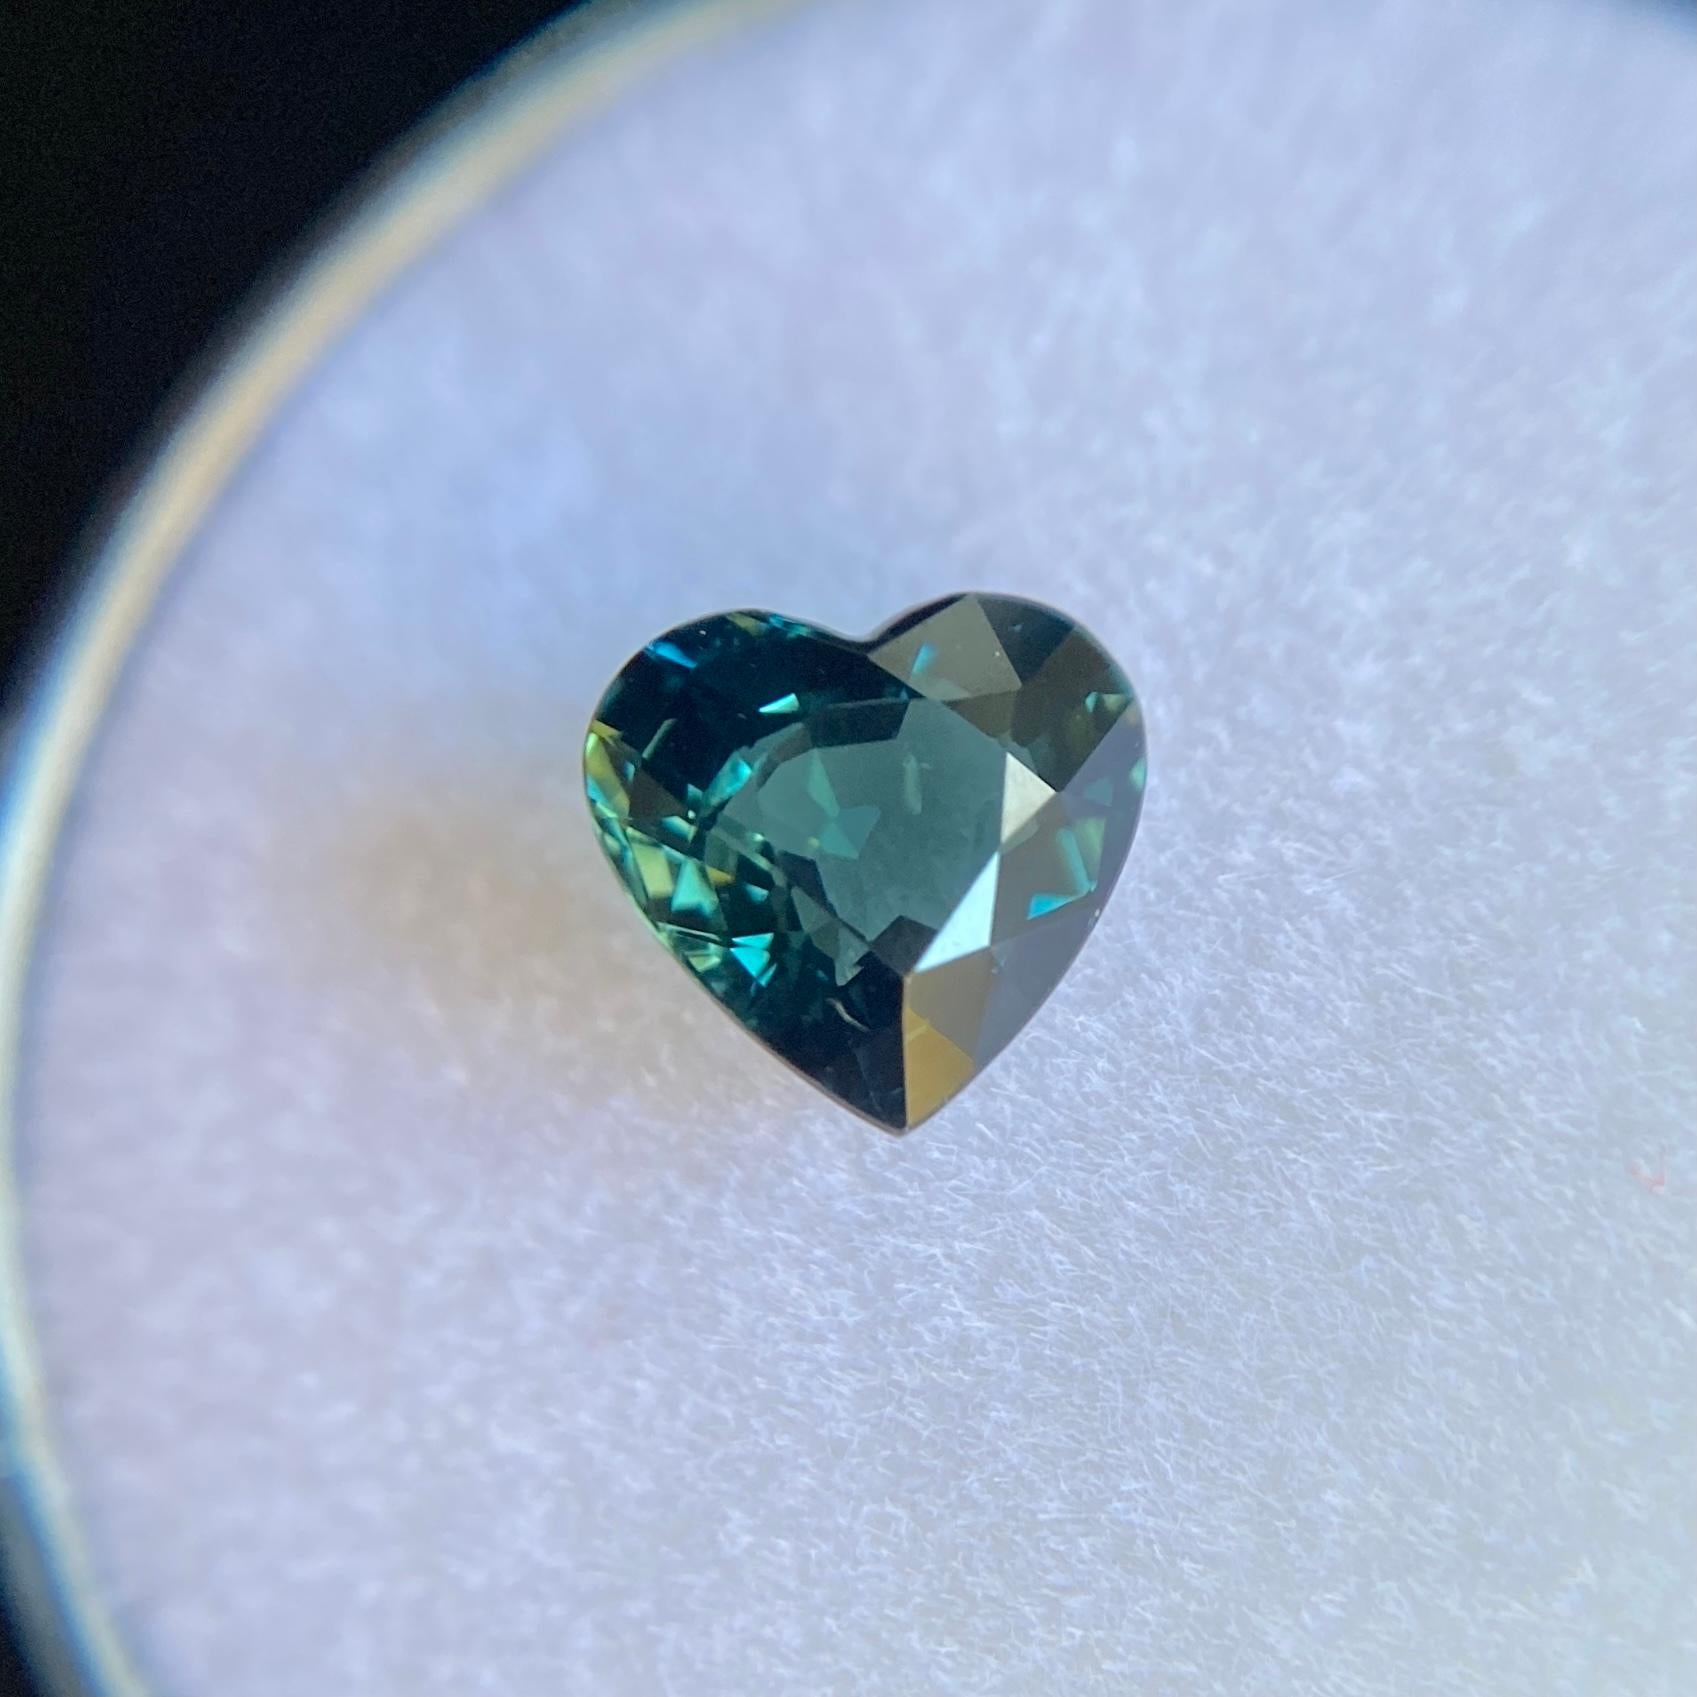 GIA Certified Untreated Green Blue Sapphire Gemstone.

1.12 Carat unheated sapphire with a beautiful deep green blue colour.

Fully certified by GIA confirming stone as natural and untreated.

The sapphire has excellent clarity, a very clean